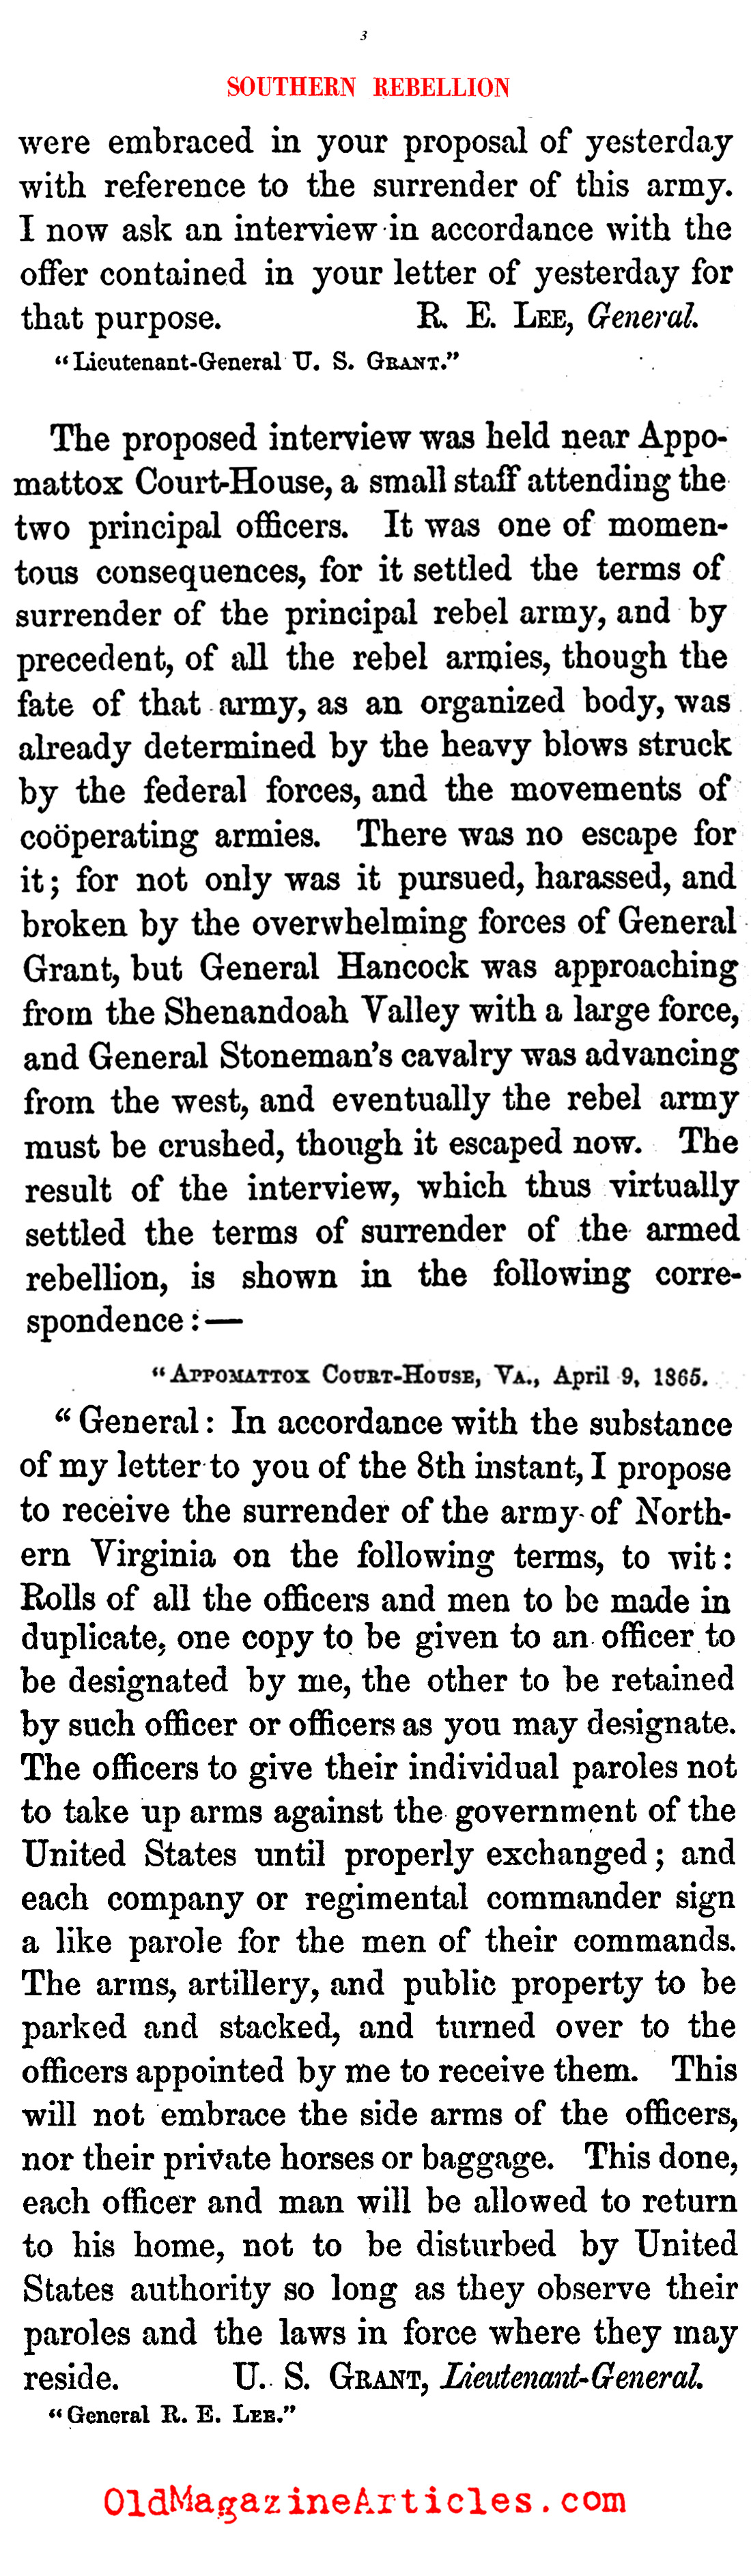 The Closing Letters Between Generals Grant and Lee (The Rebellion, 1867)